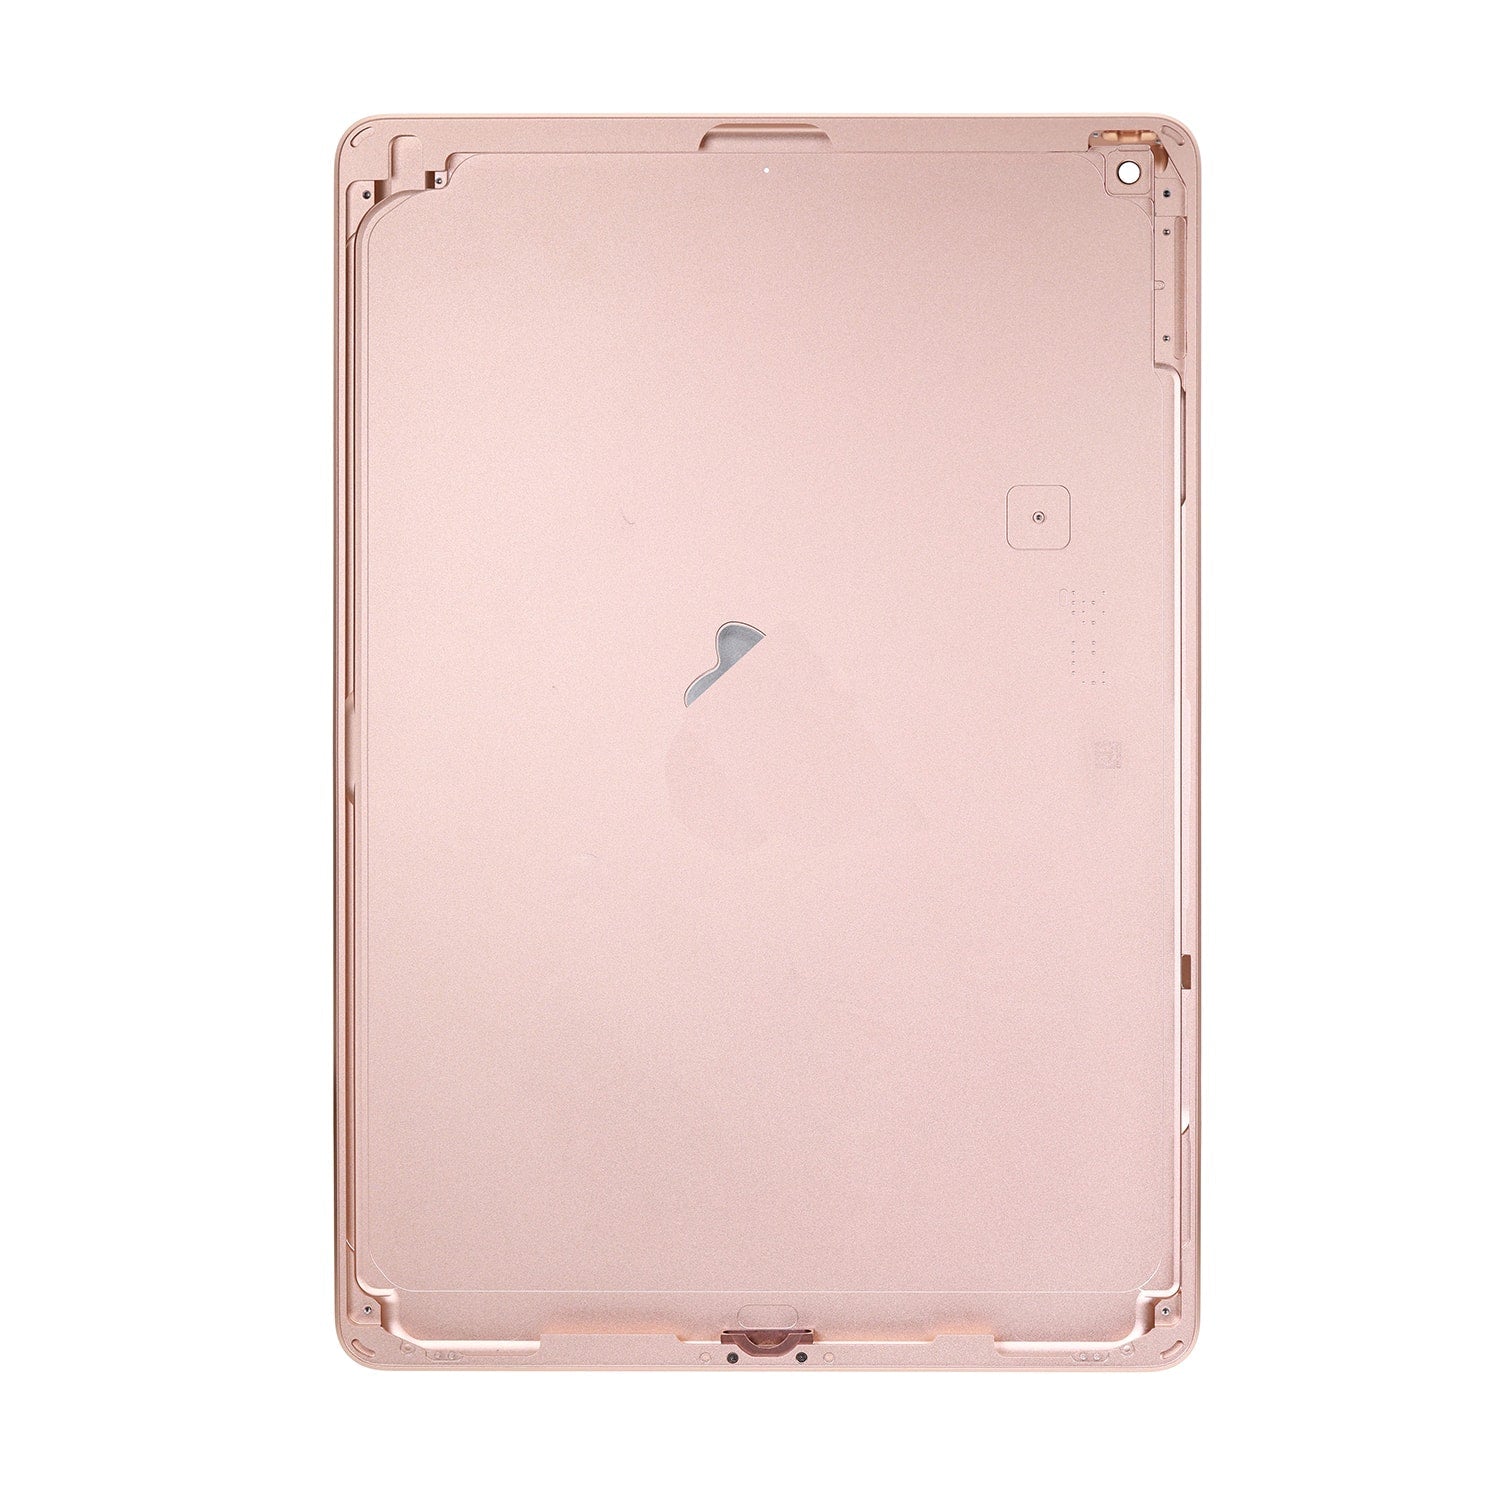 ROSE GOLD BACK COVER (WIFI VERSION) FOR IPAD 7TH/8TH